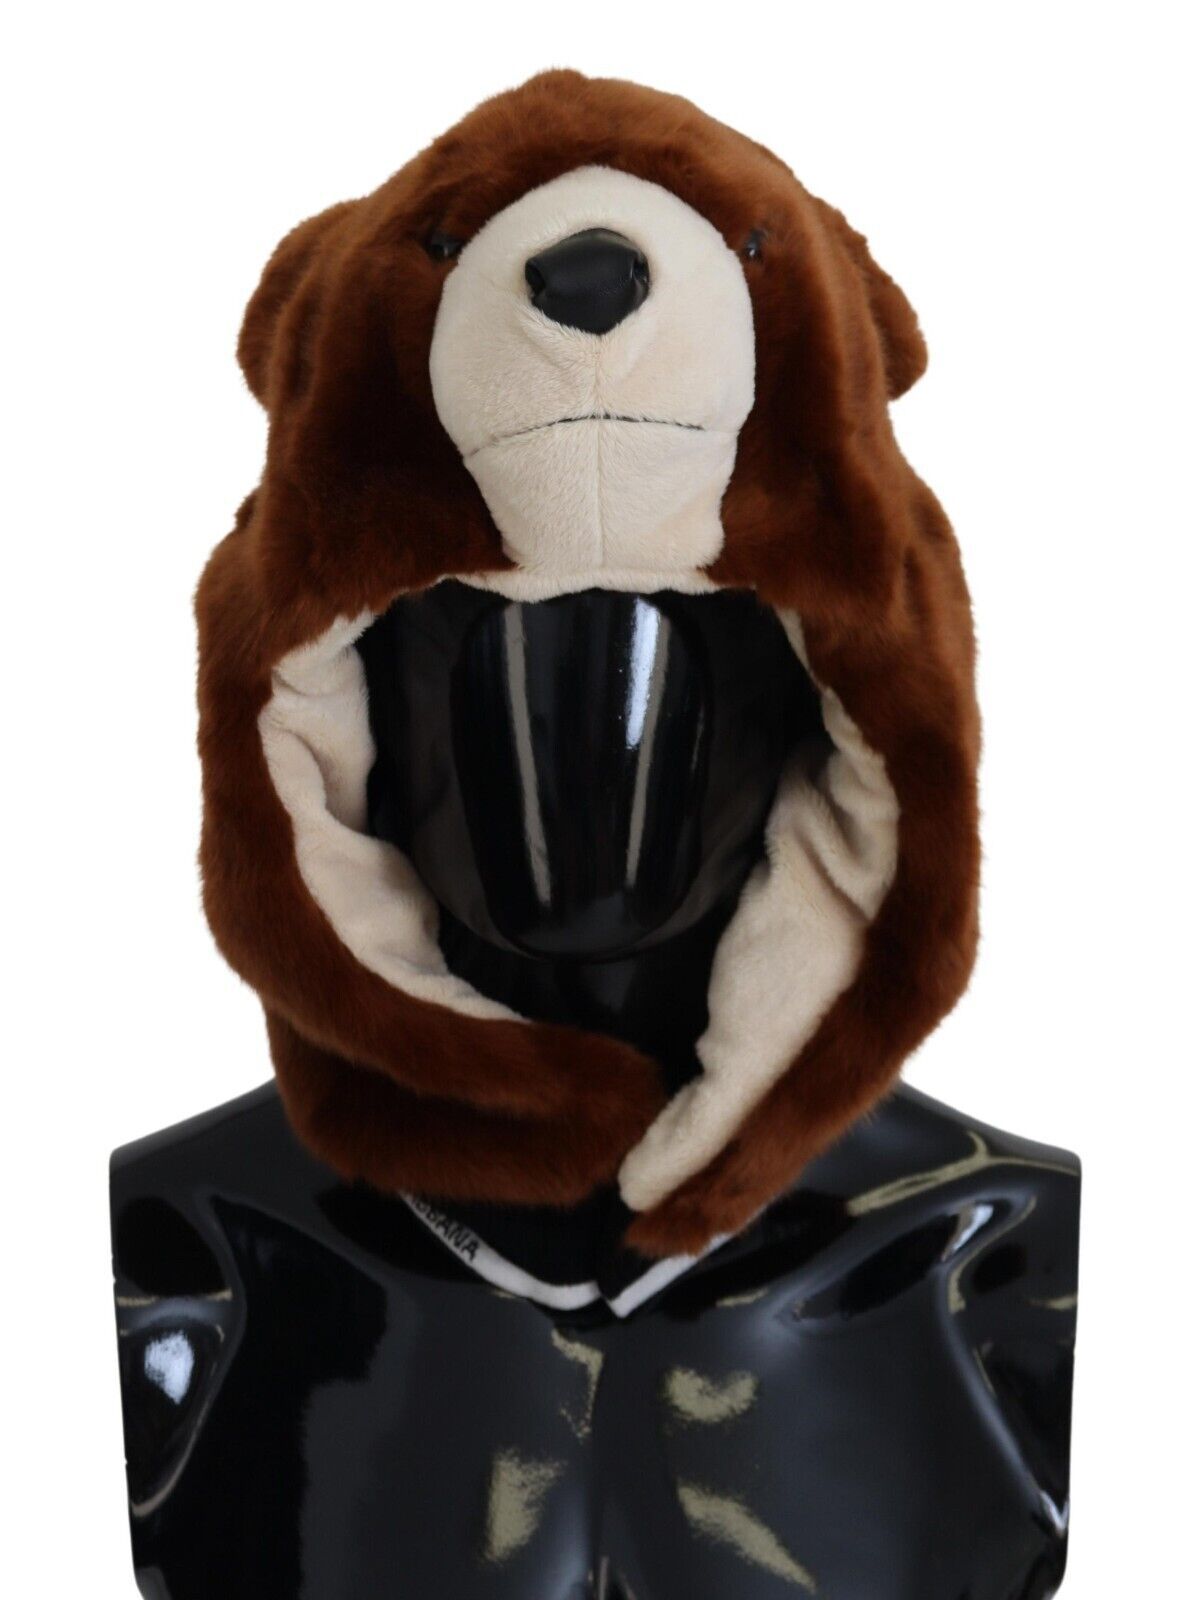 Dolce & Gabbana Brown Bear Fur Whole Head Cap One Size Polyester Hat